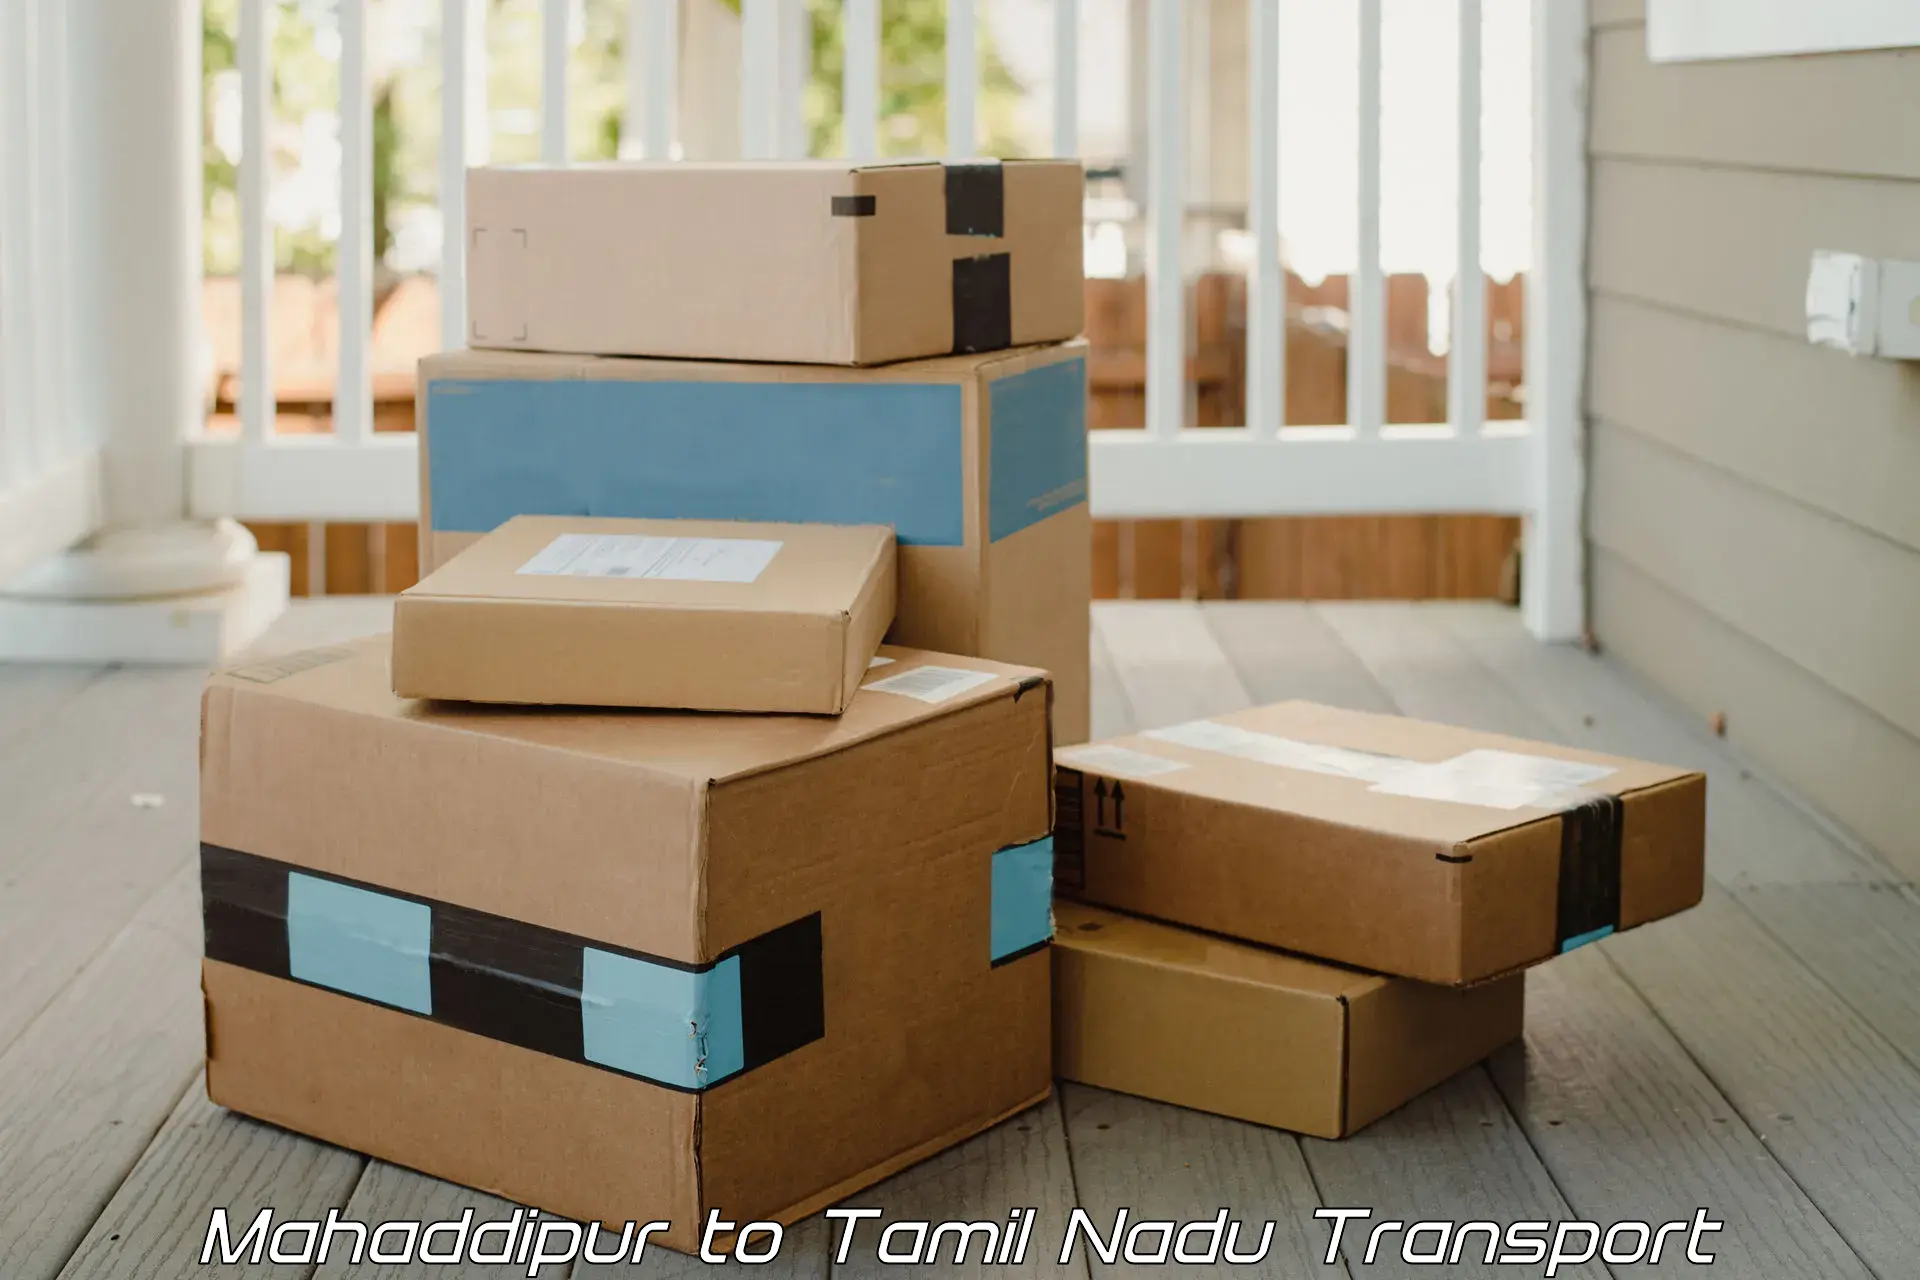 Package delivery services Mahaddipur to Periyakulam